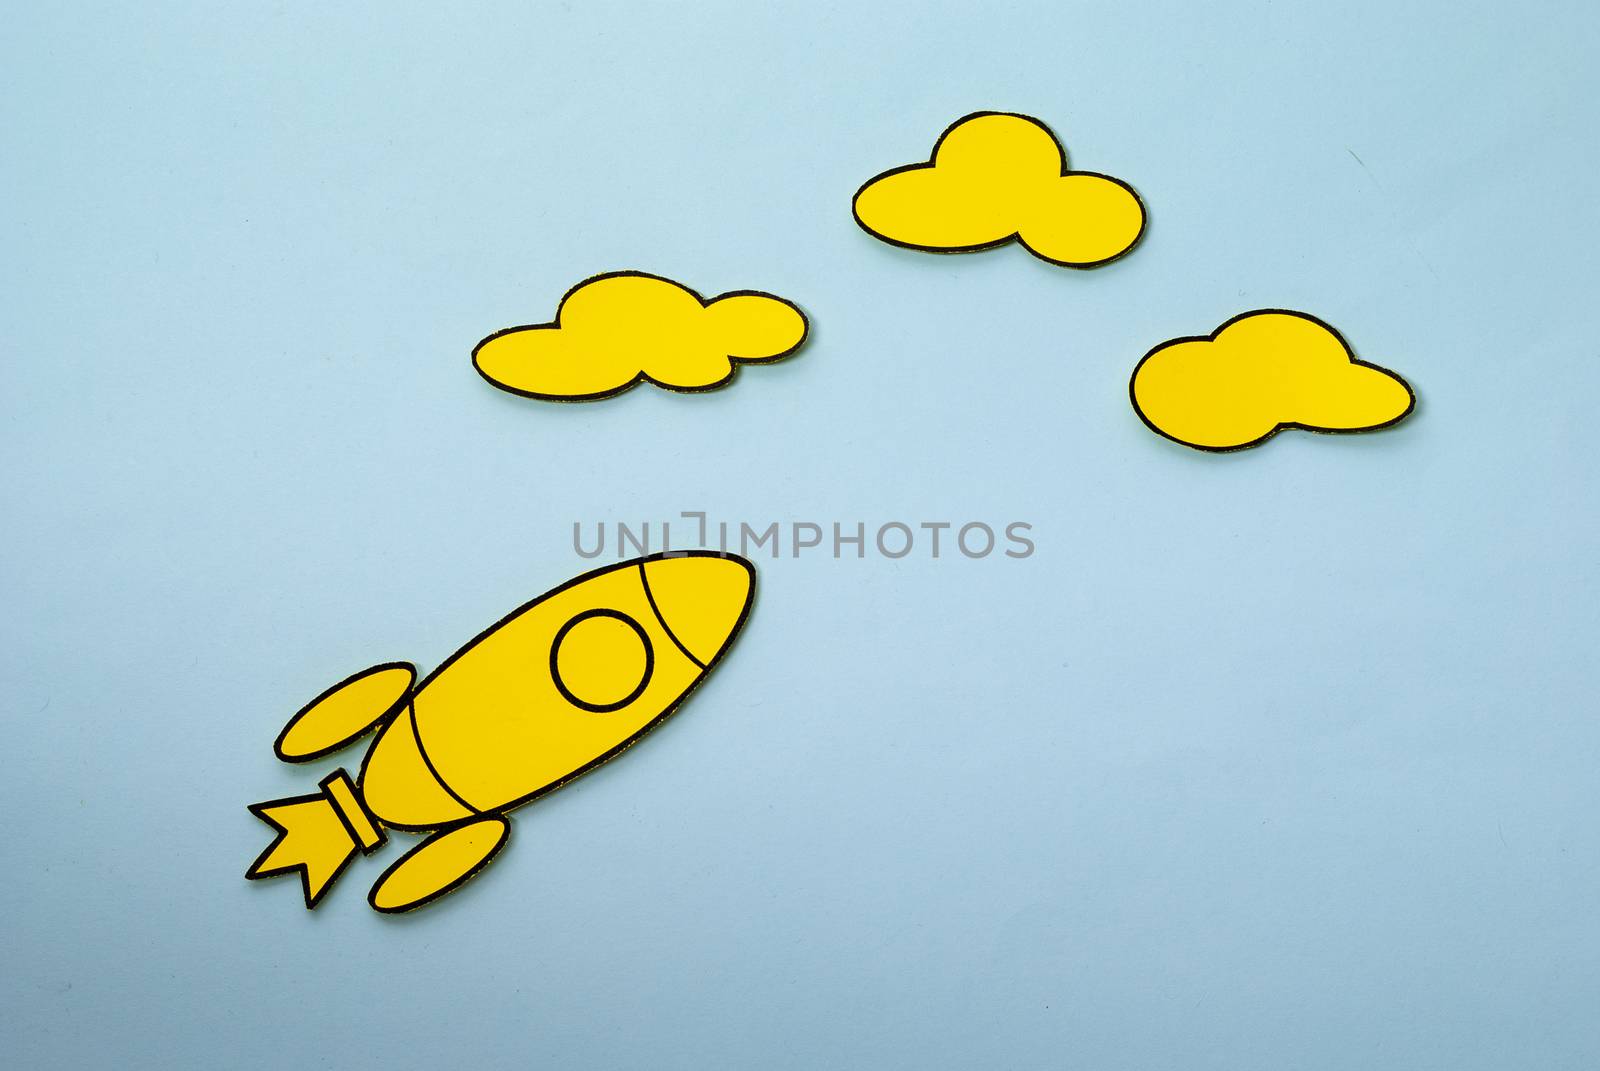 Little yellow rocket flying high aiming for the clouds in a concept of ambition and success over a blue background with copy space